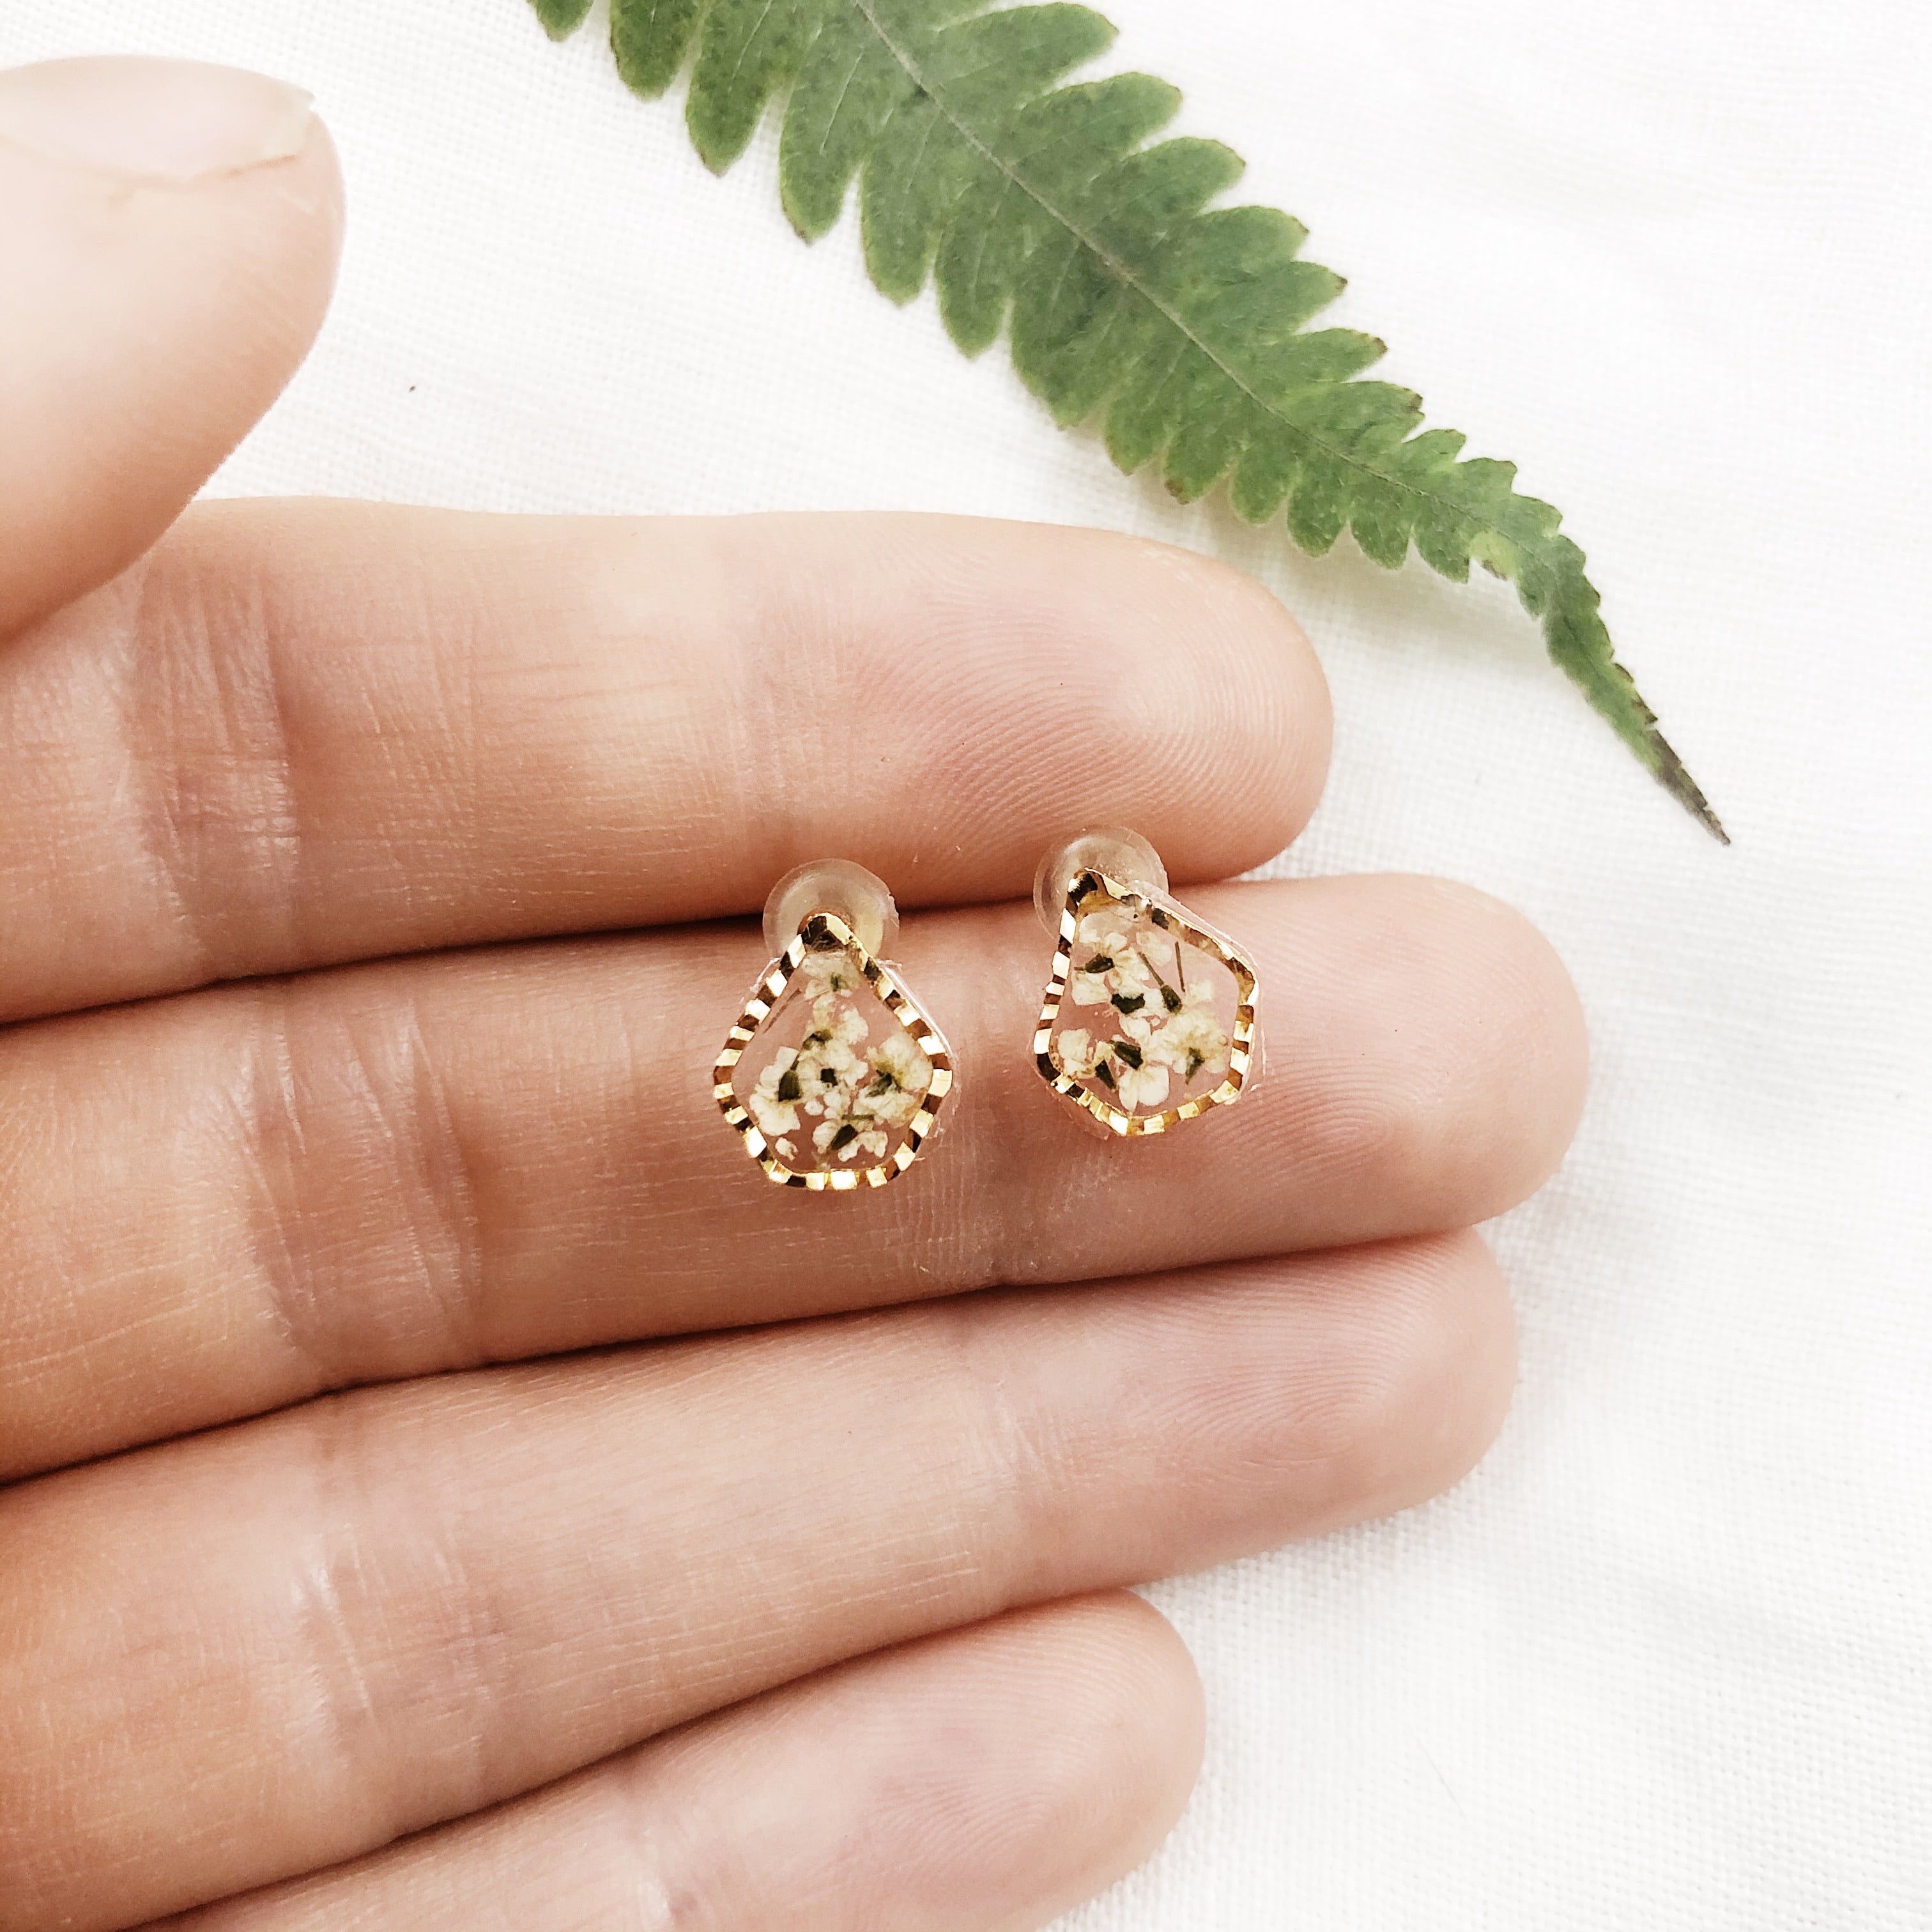 Phoebe - Dainty Gold Stud Earrings with Pressed Flowers